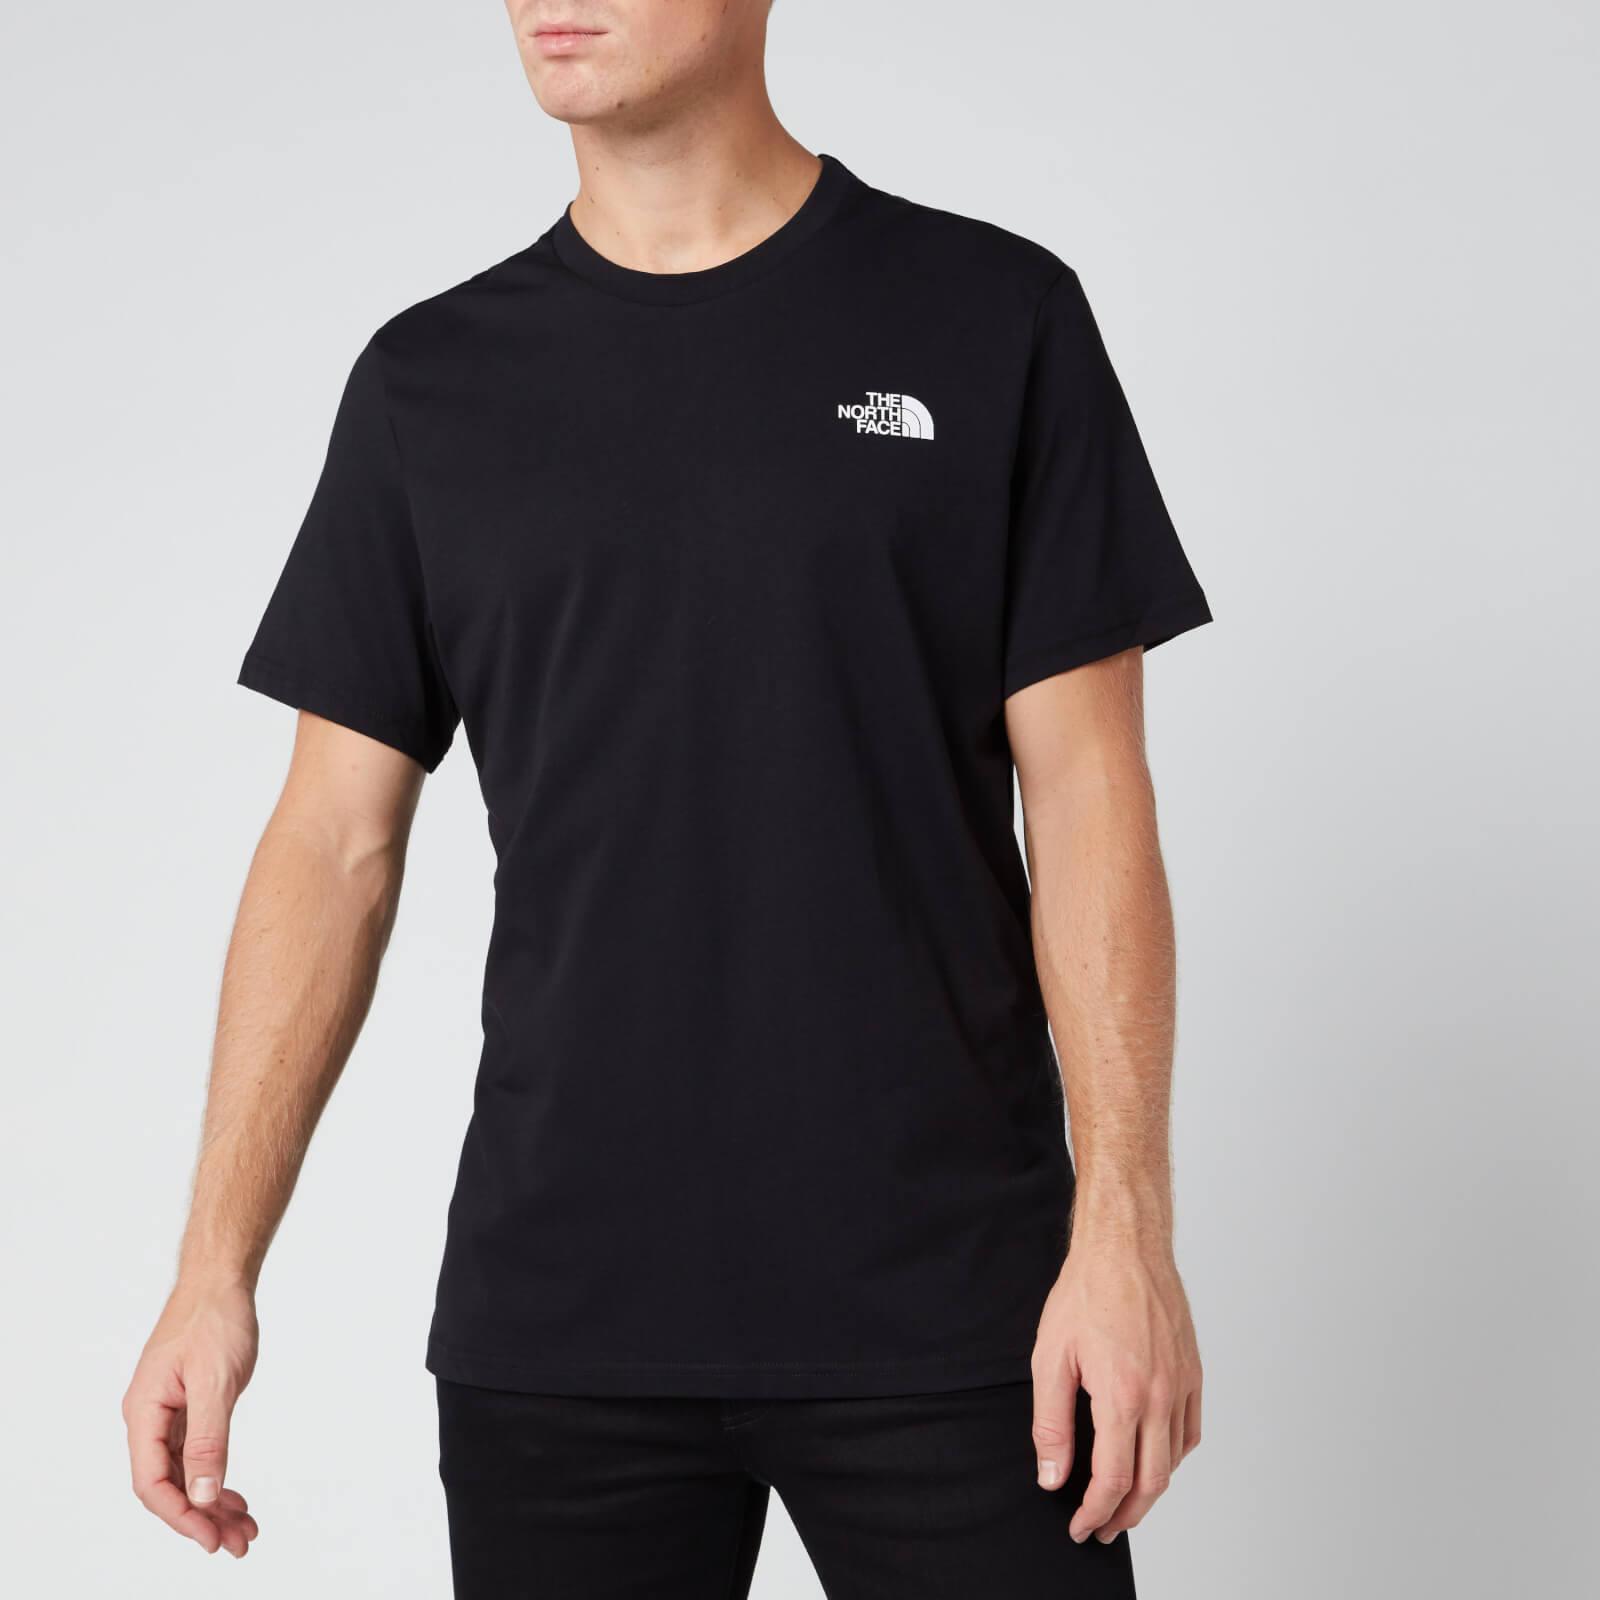 The North Face Denim Simple Dome T-shirt in Black for Men - Save 24% - Lyst